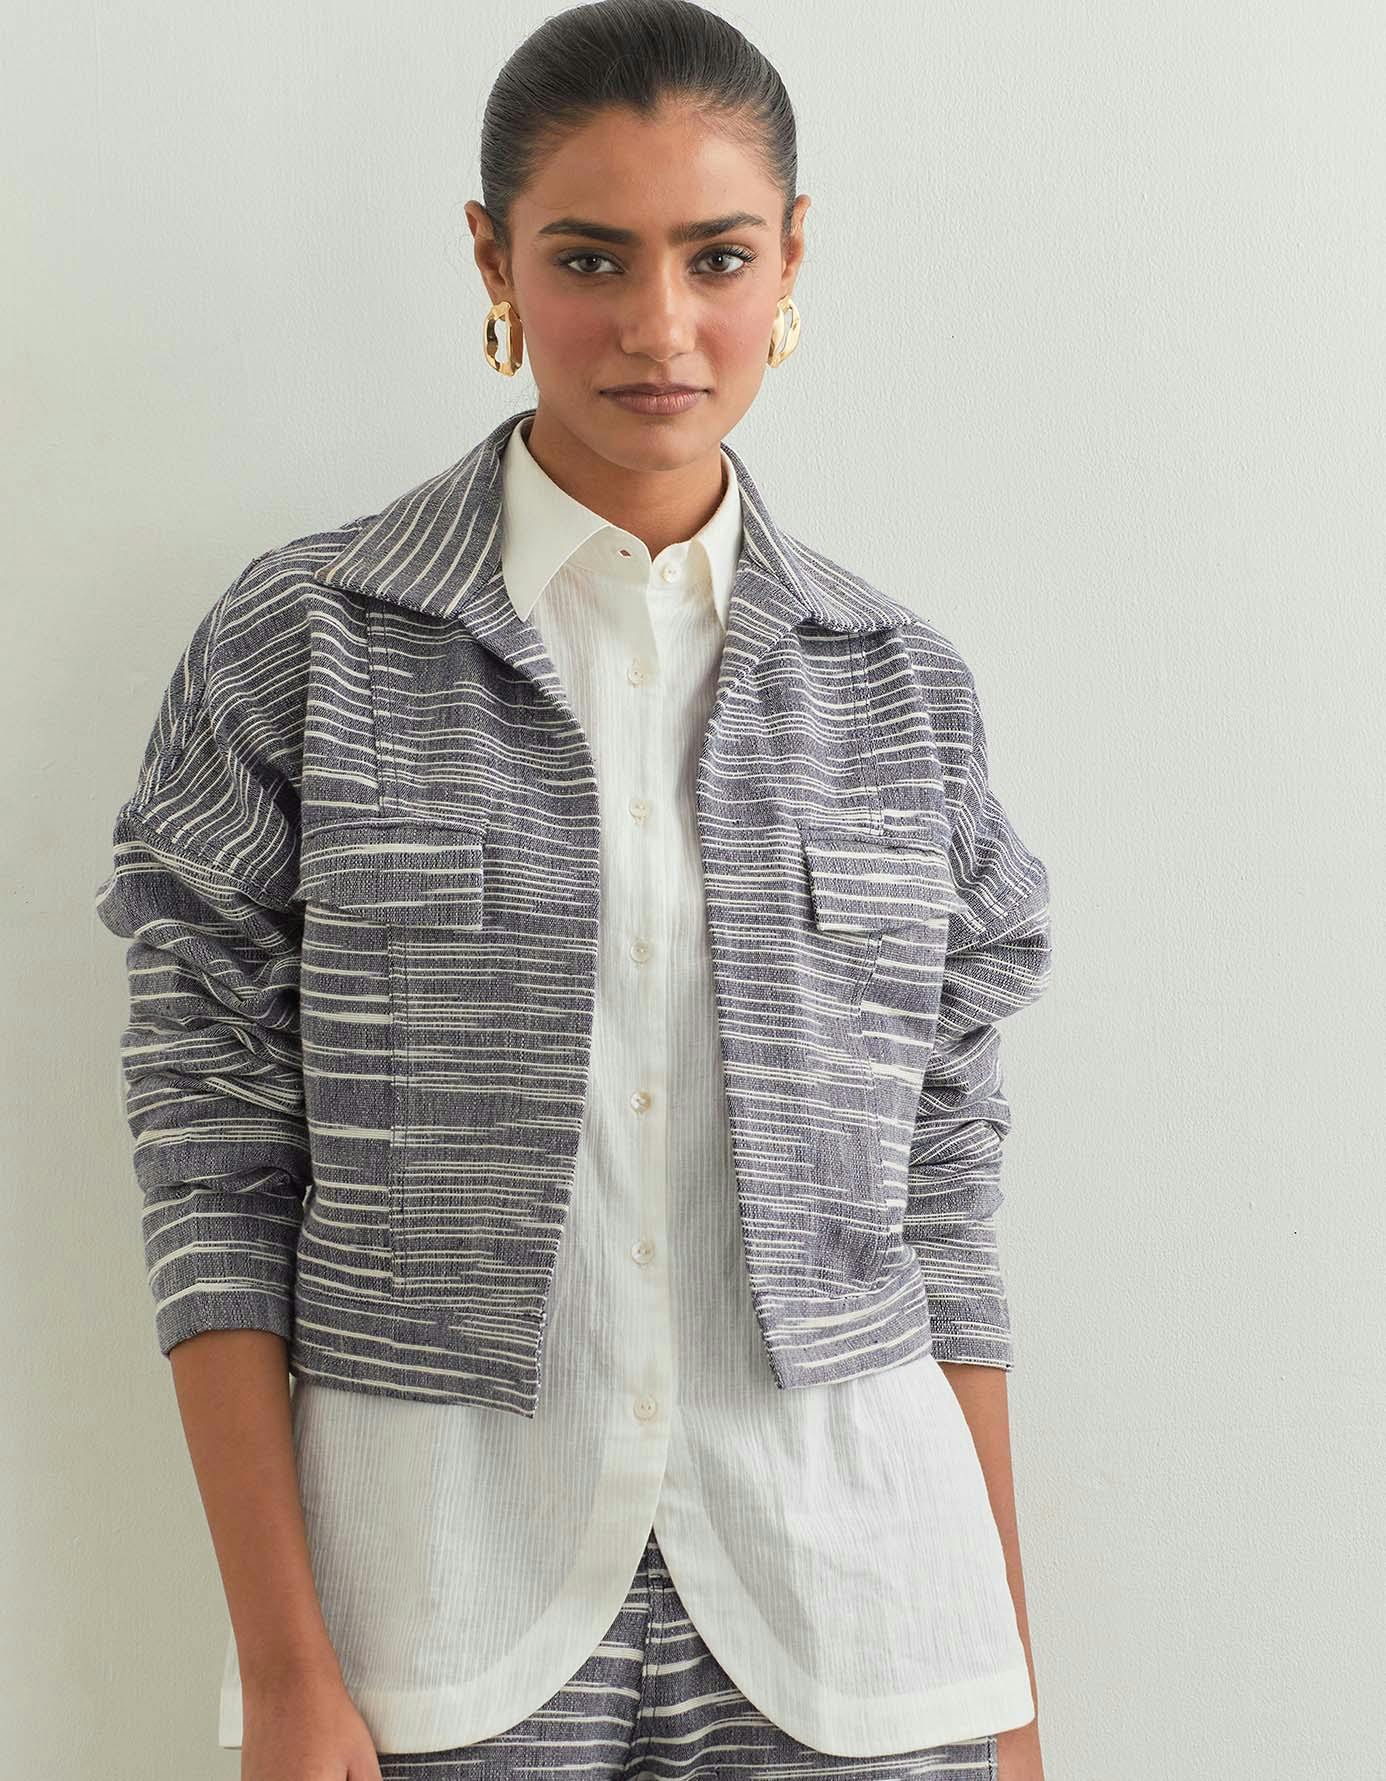 MADISON JACKET In Handwoven, a product by SIX BUTTONS DOWN